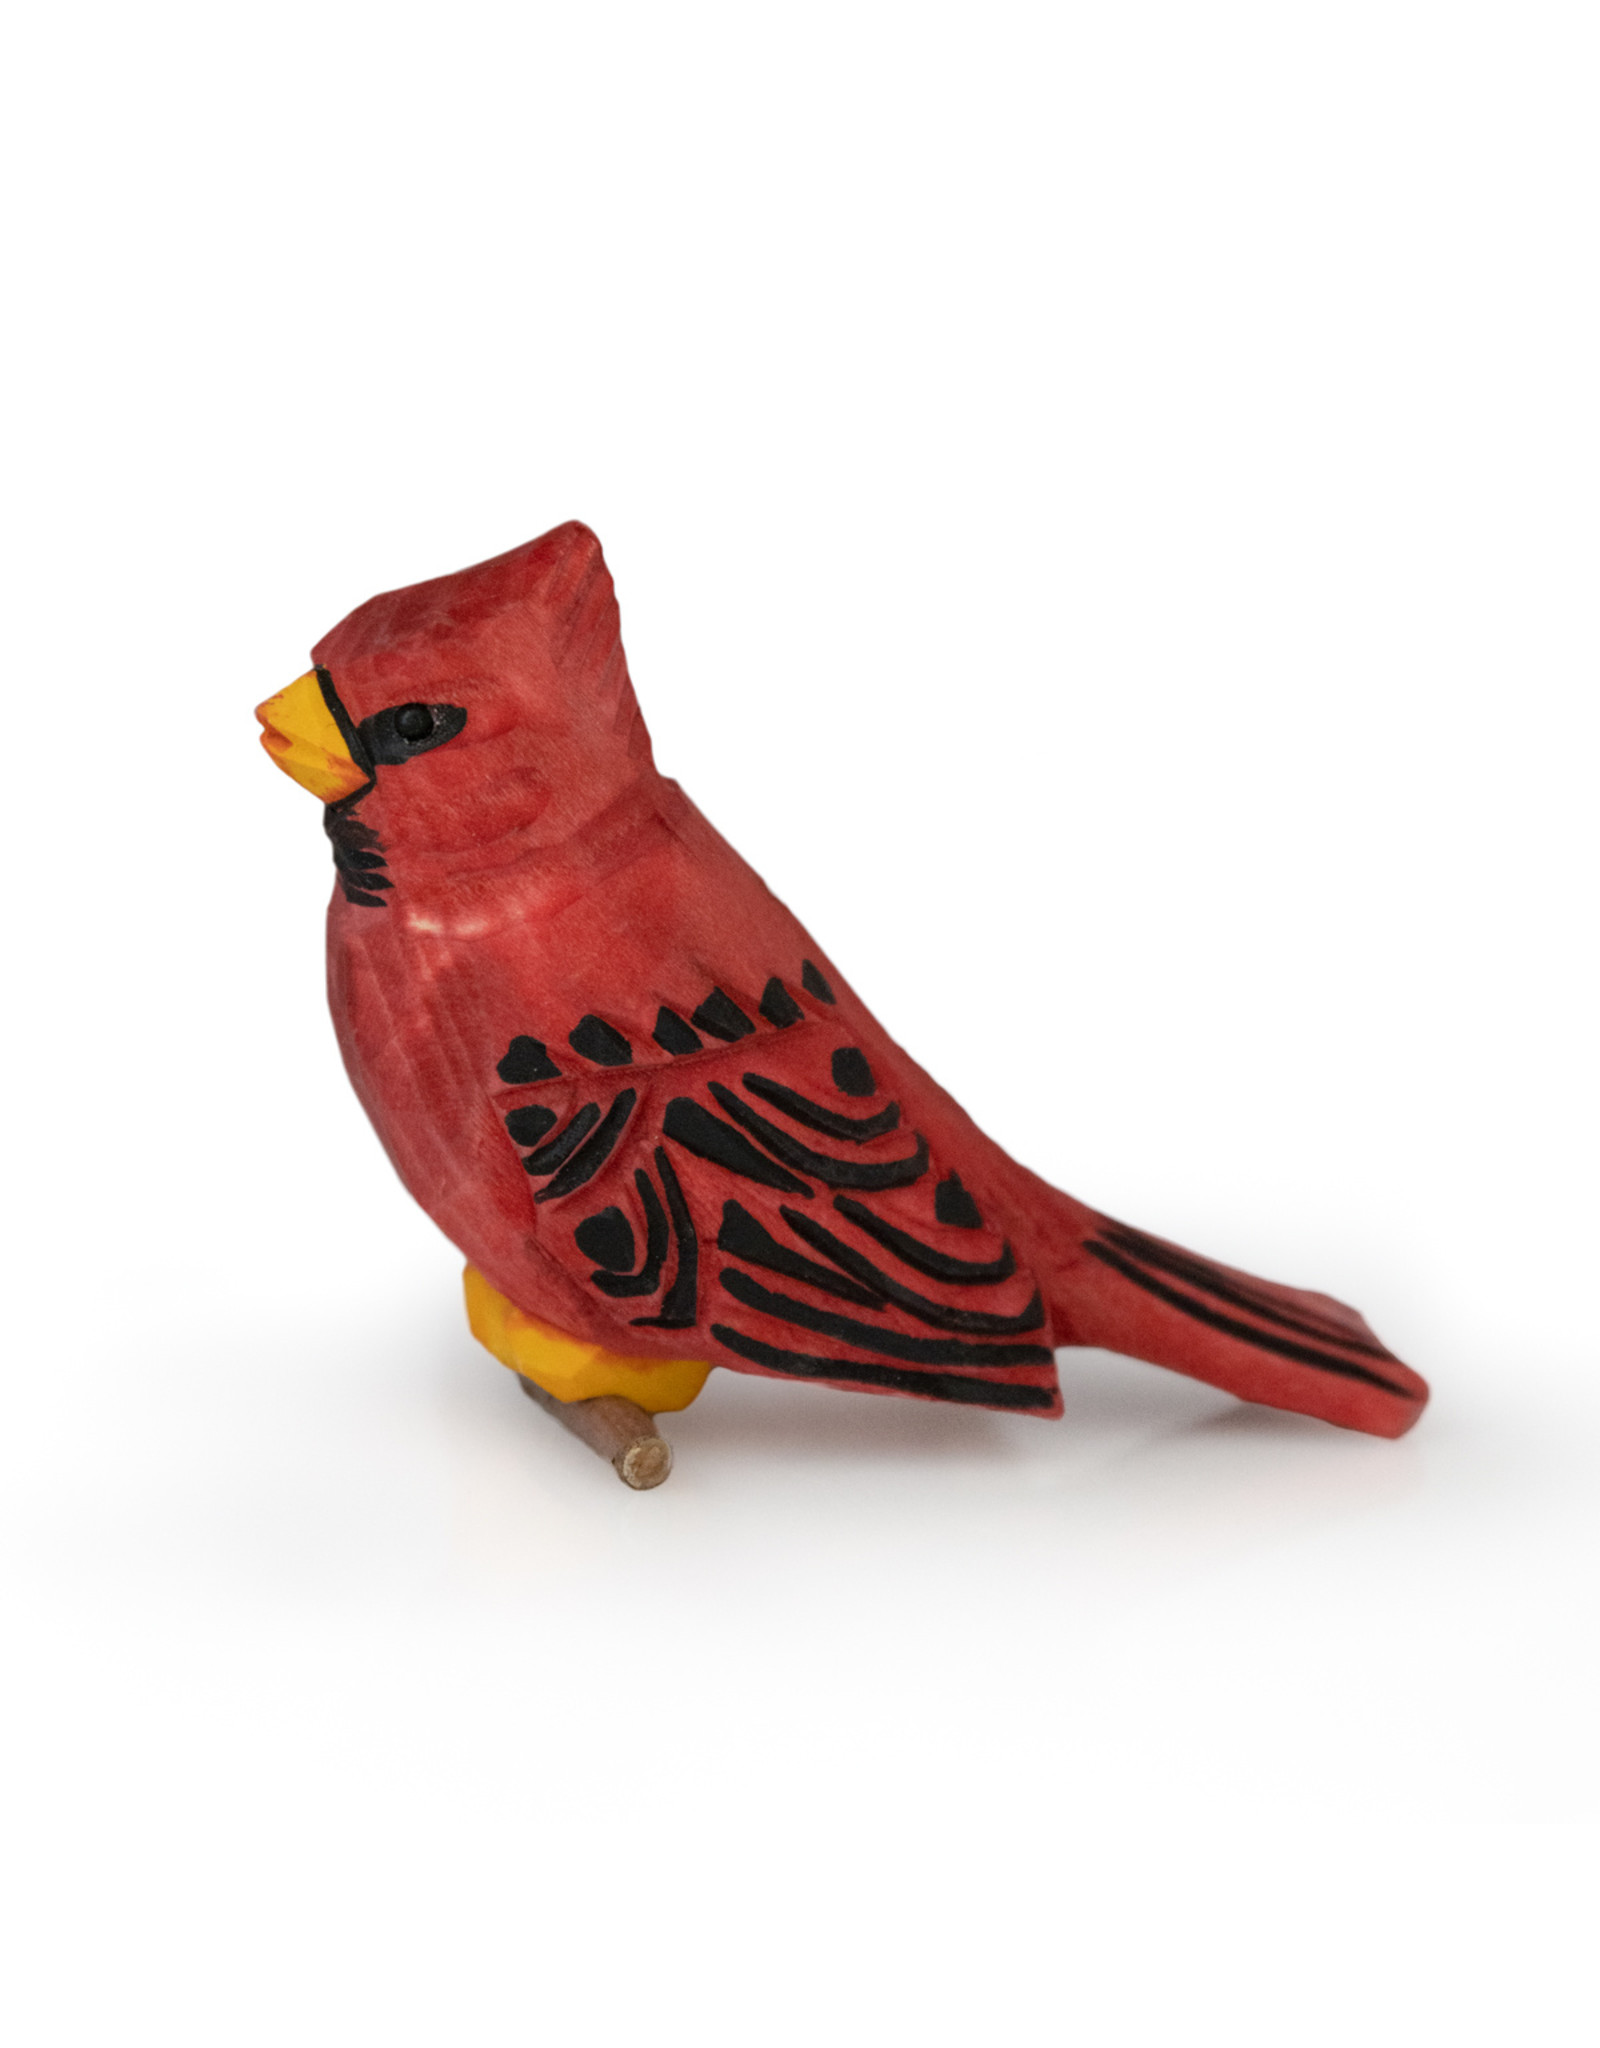 Hand Carved Bird Ornaments (choose from 9 birds!)